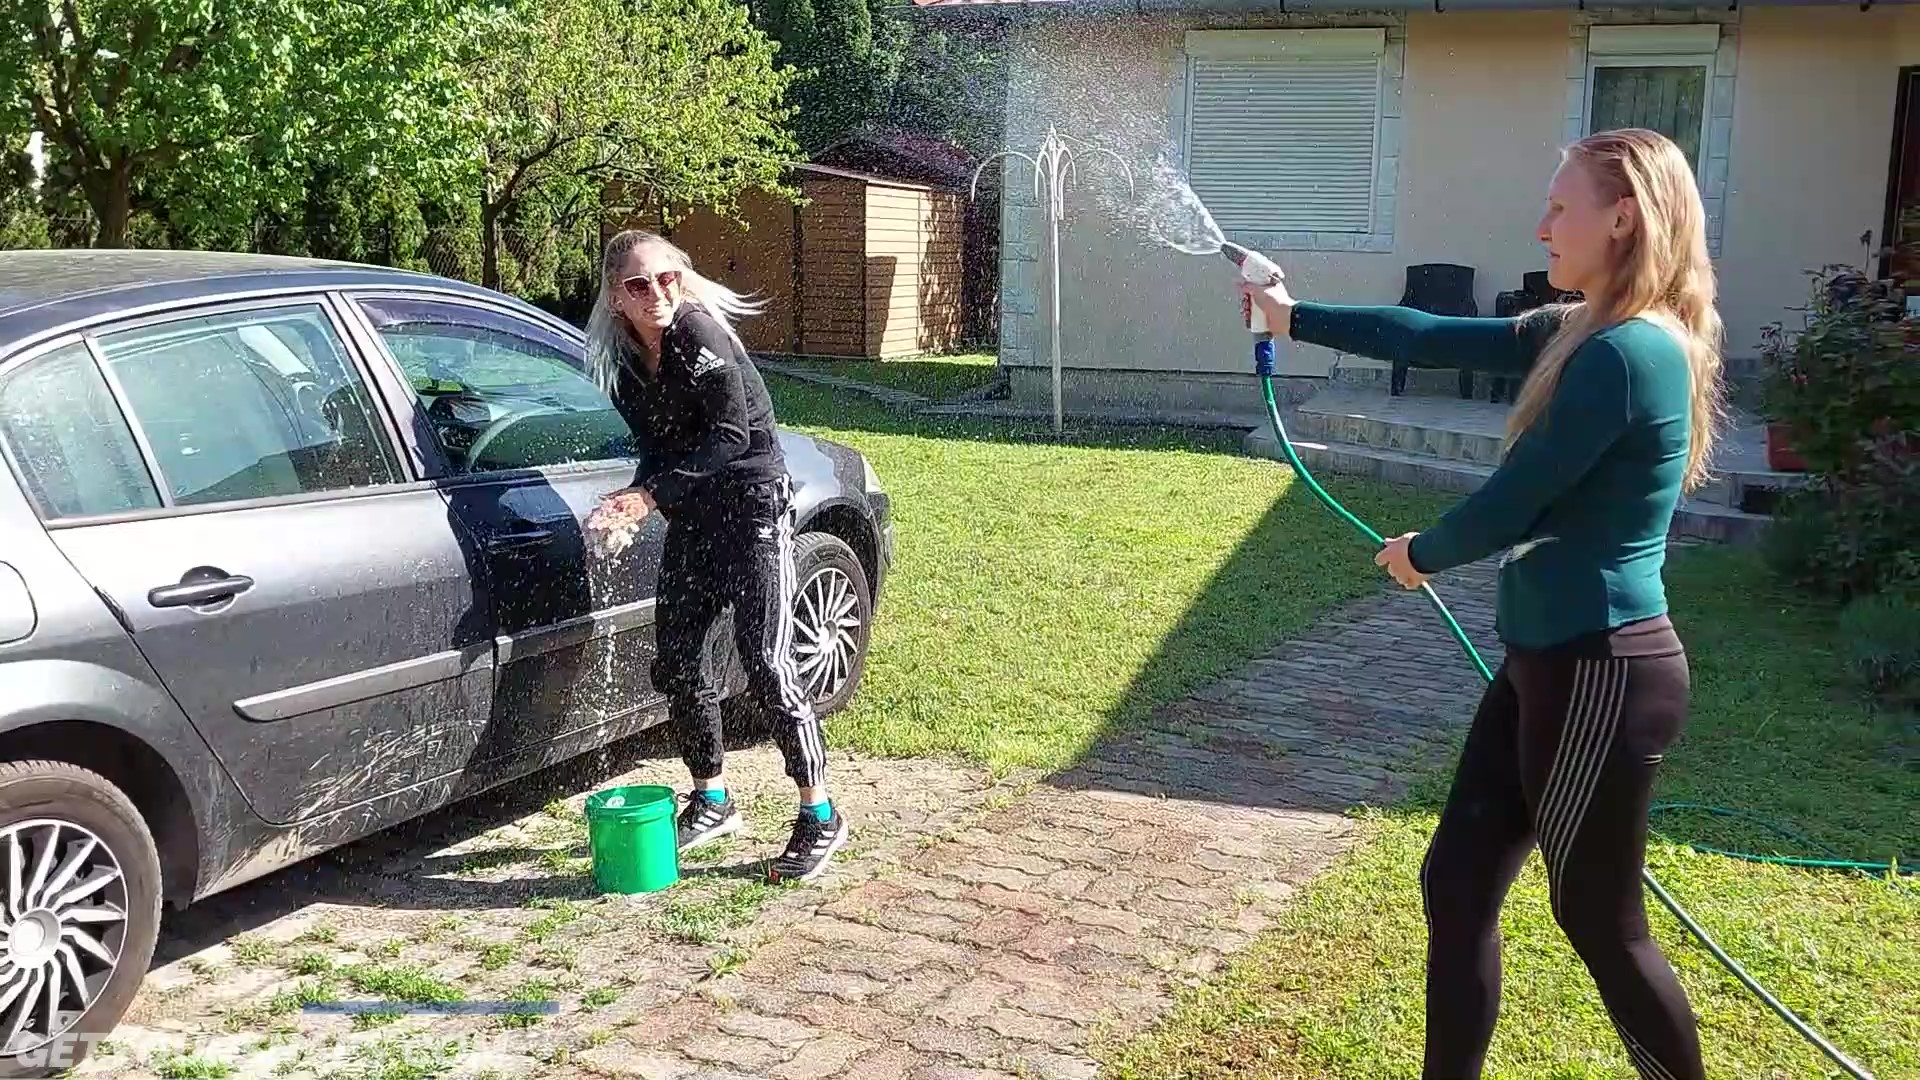 Funny Carwash by Luna and Vickey_Moment